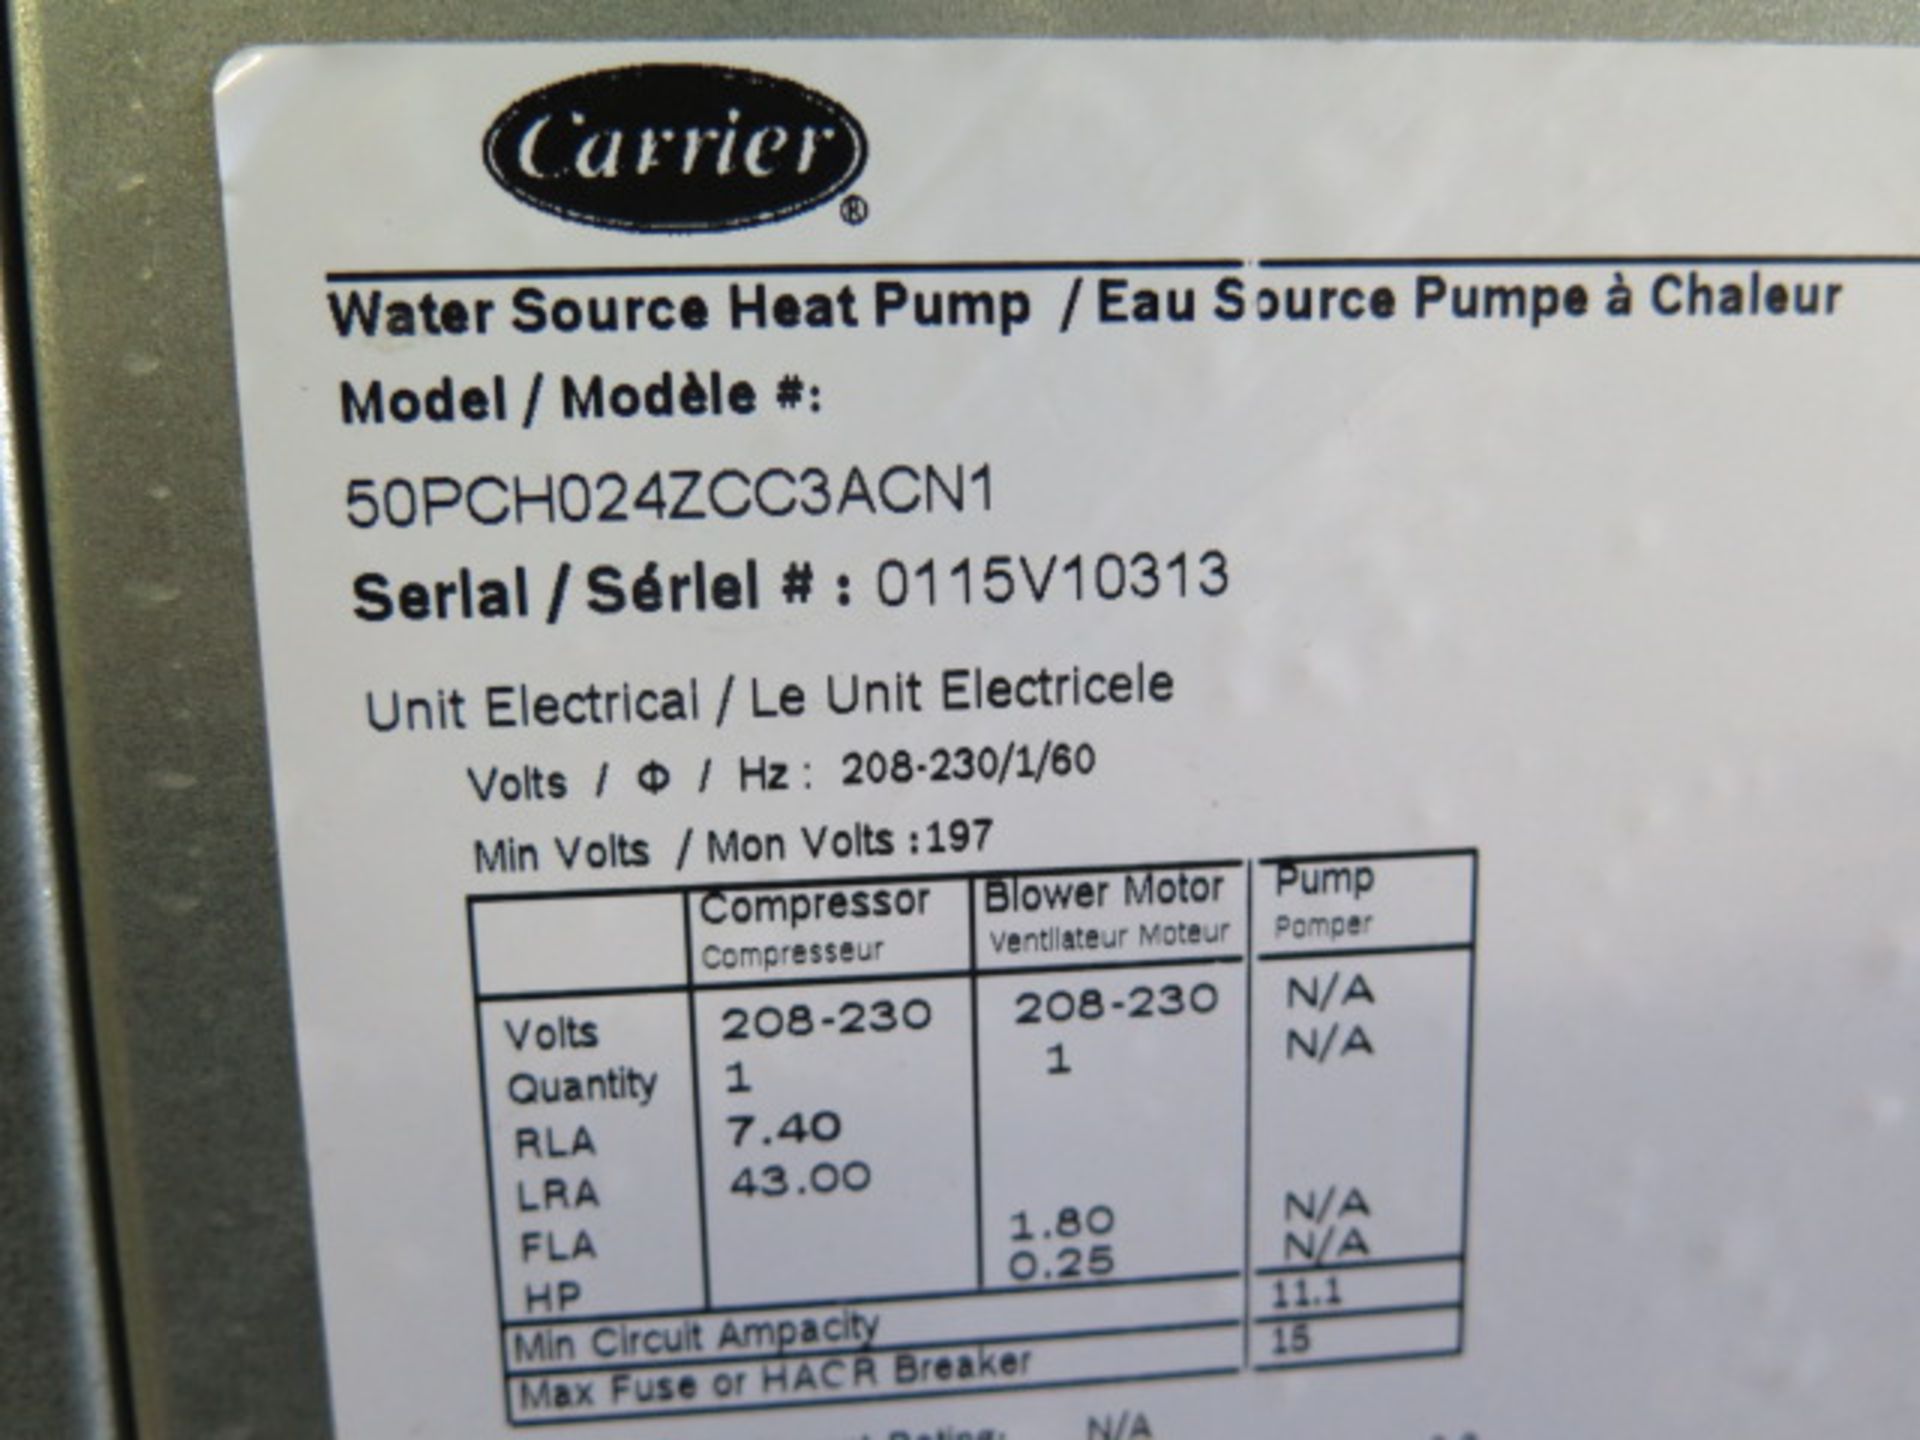 Carrier mdl. 50PCH024ZCC3ACN1 2 Ton Heat Pump 208/230V-1ph - Image 2 of 3